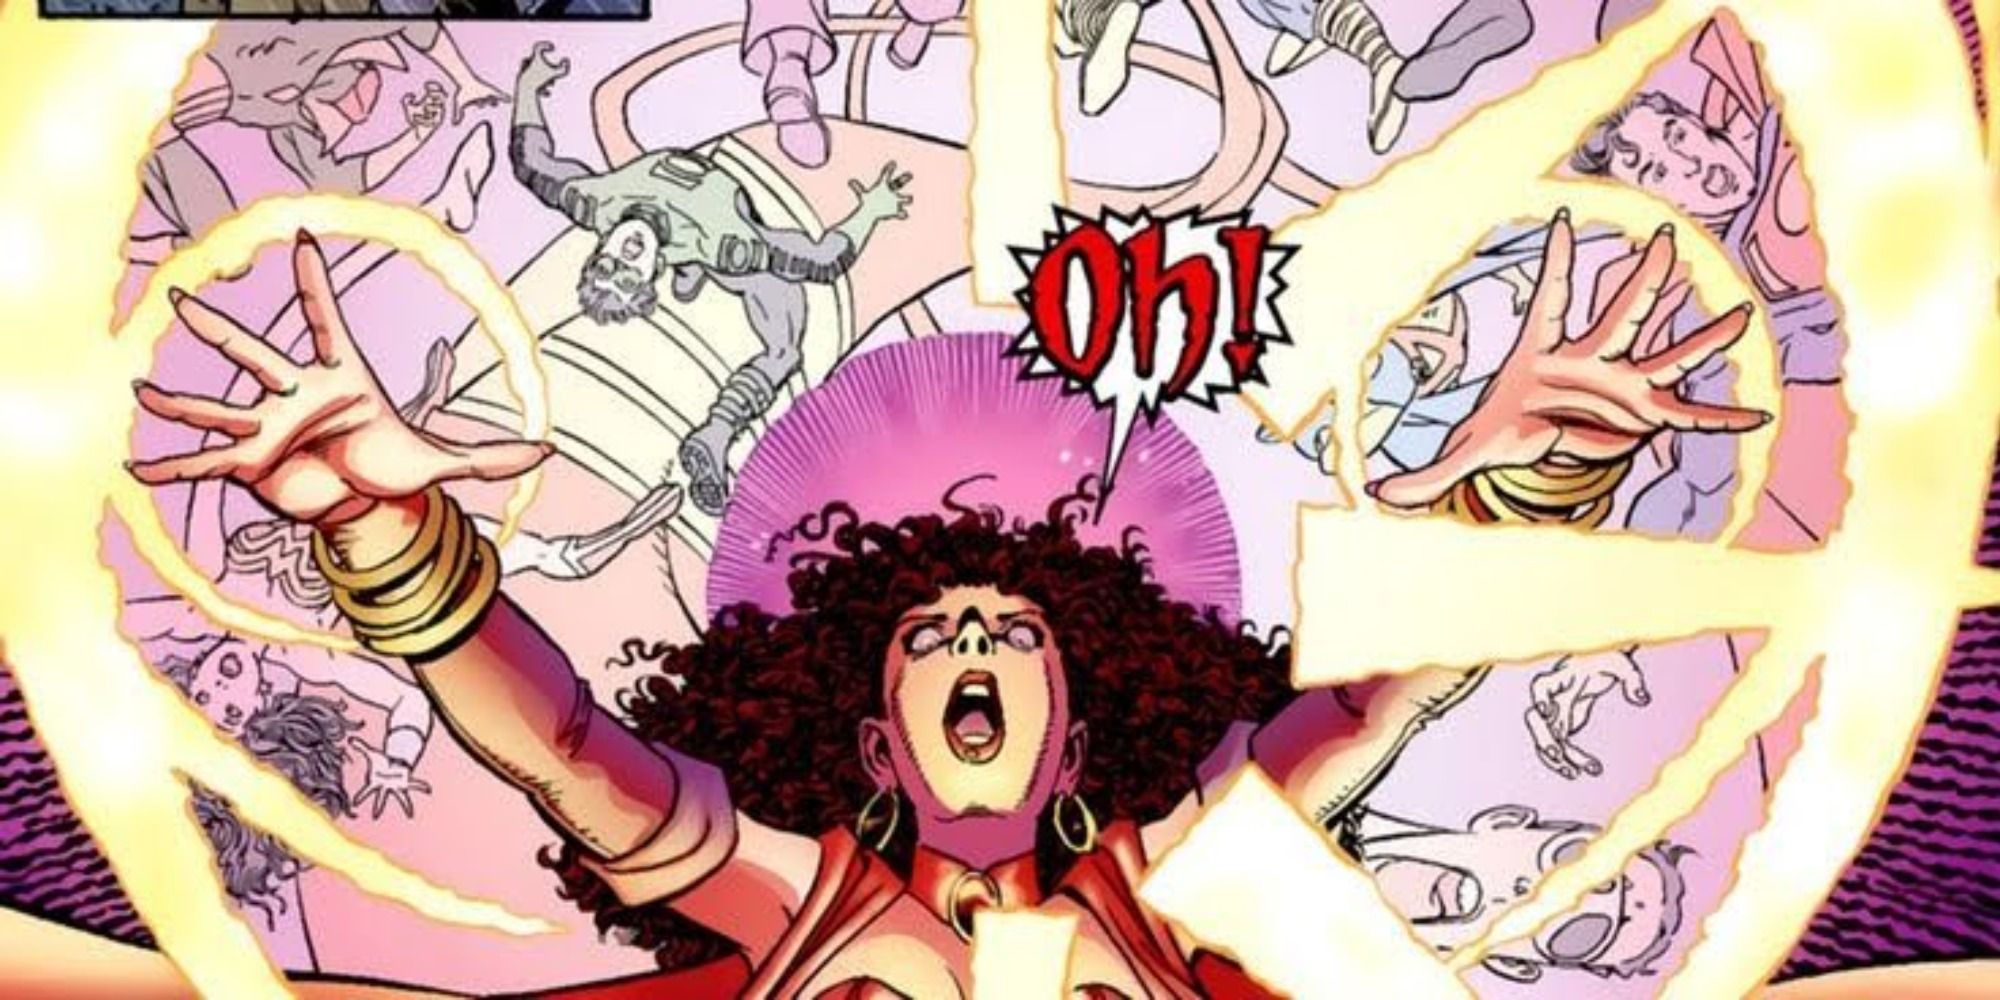 The Scarlet Witch defeats the Justice League in Marvel Comics.